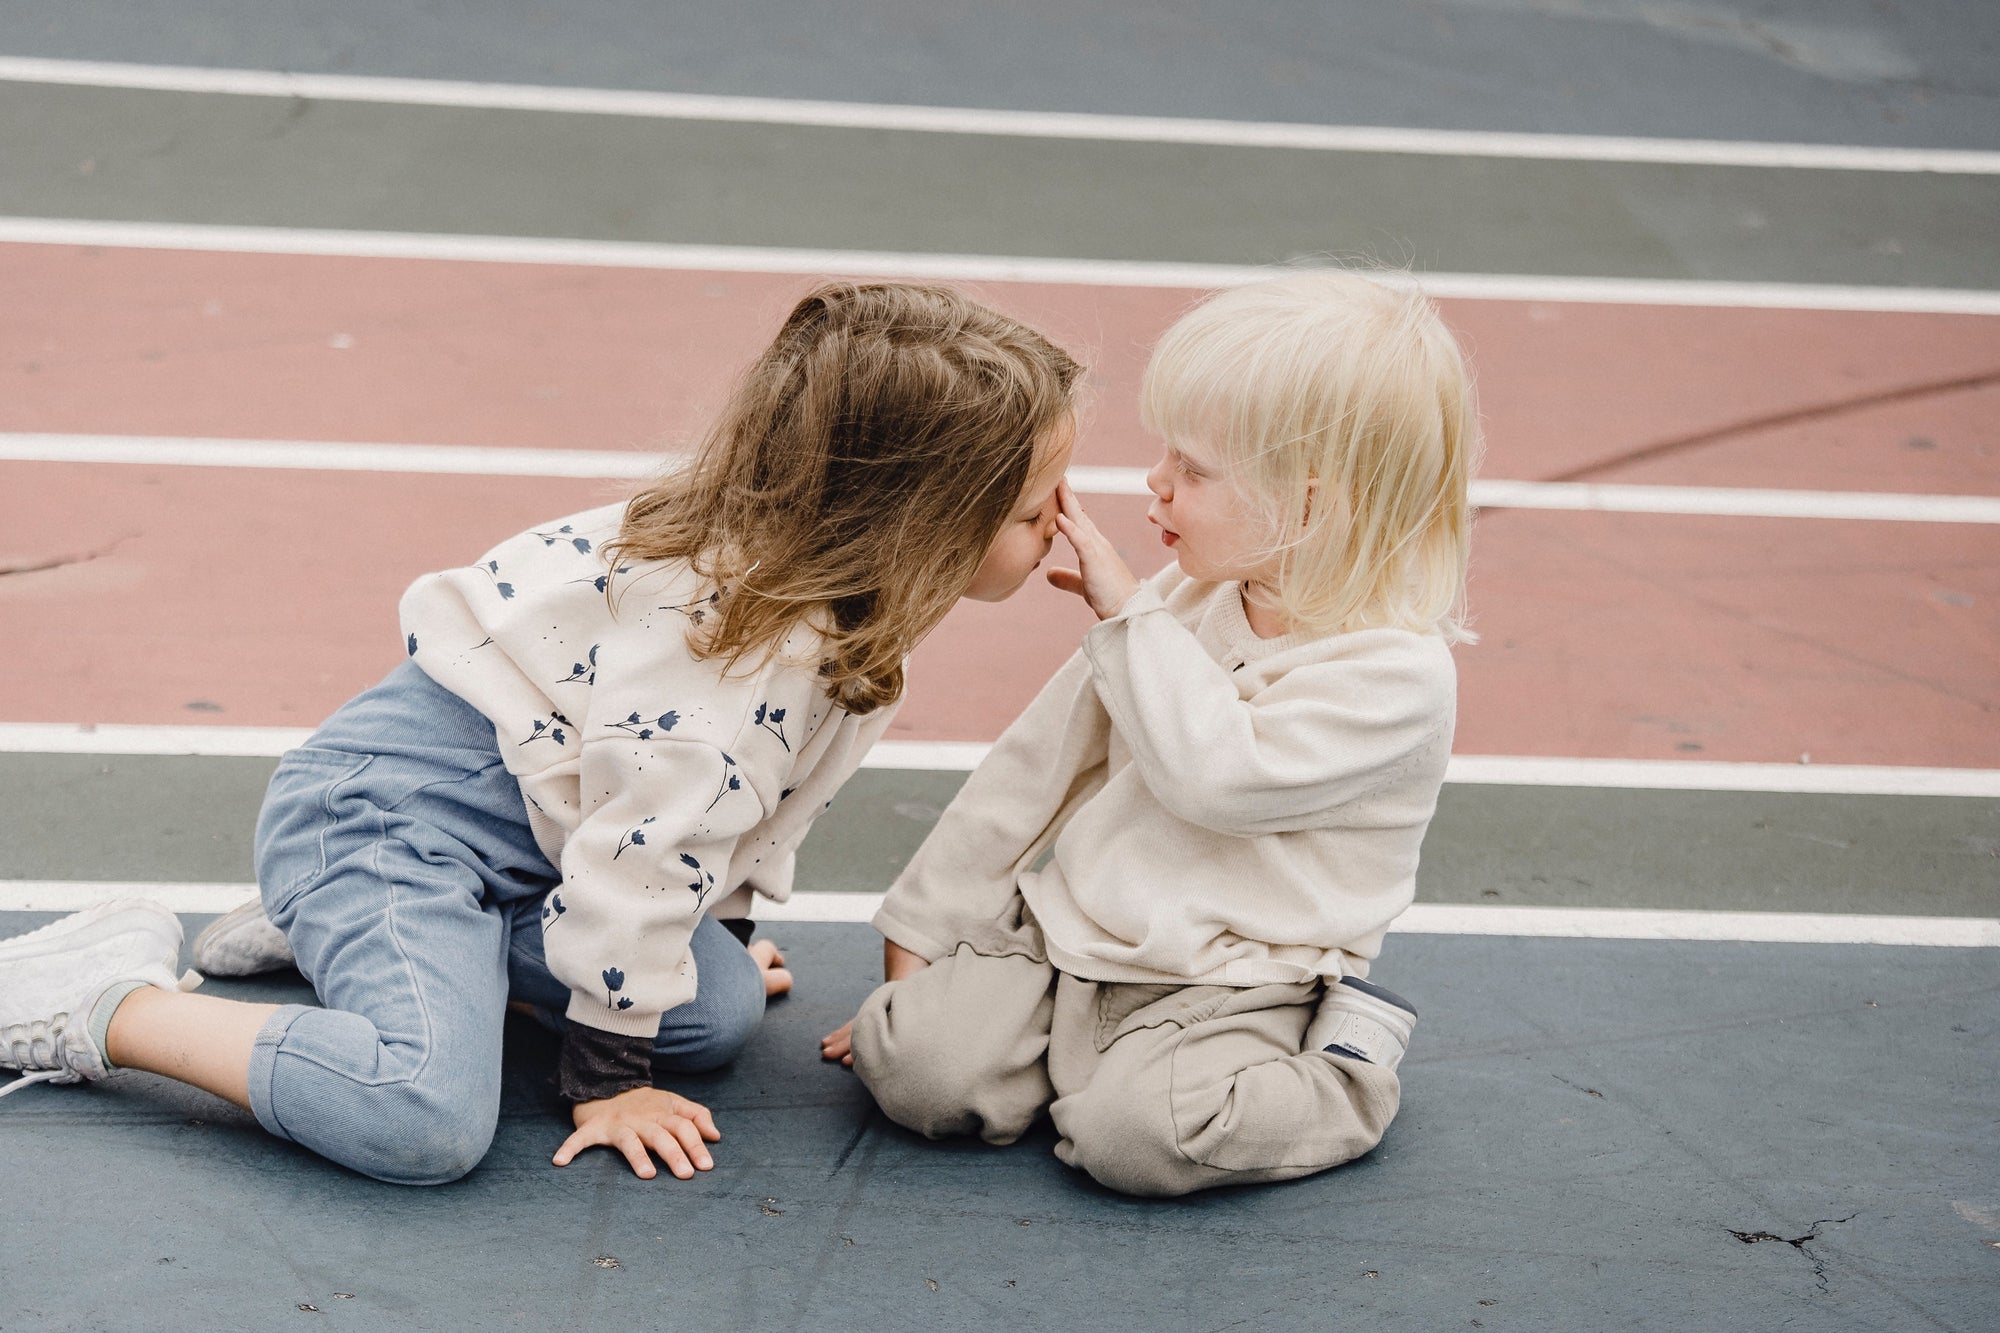 Two children playing on the playground floor